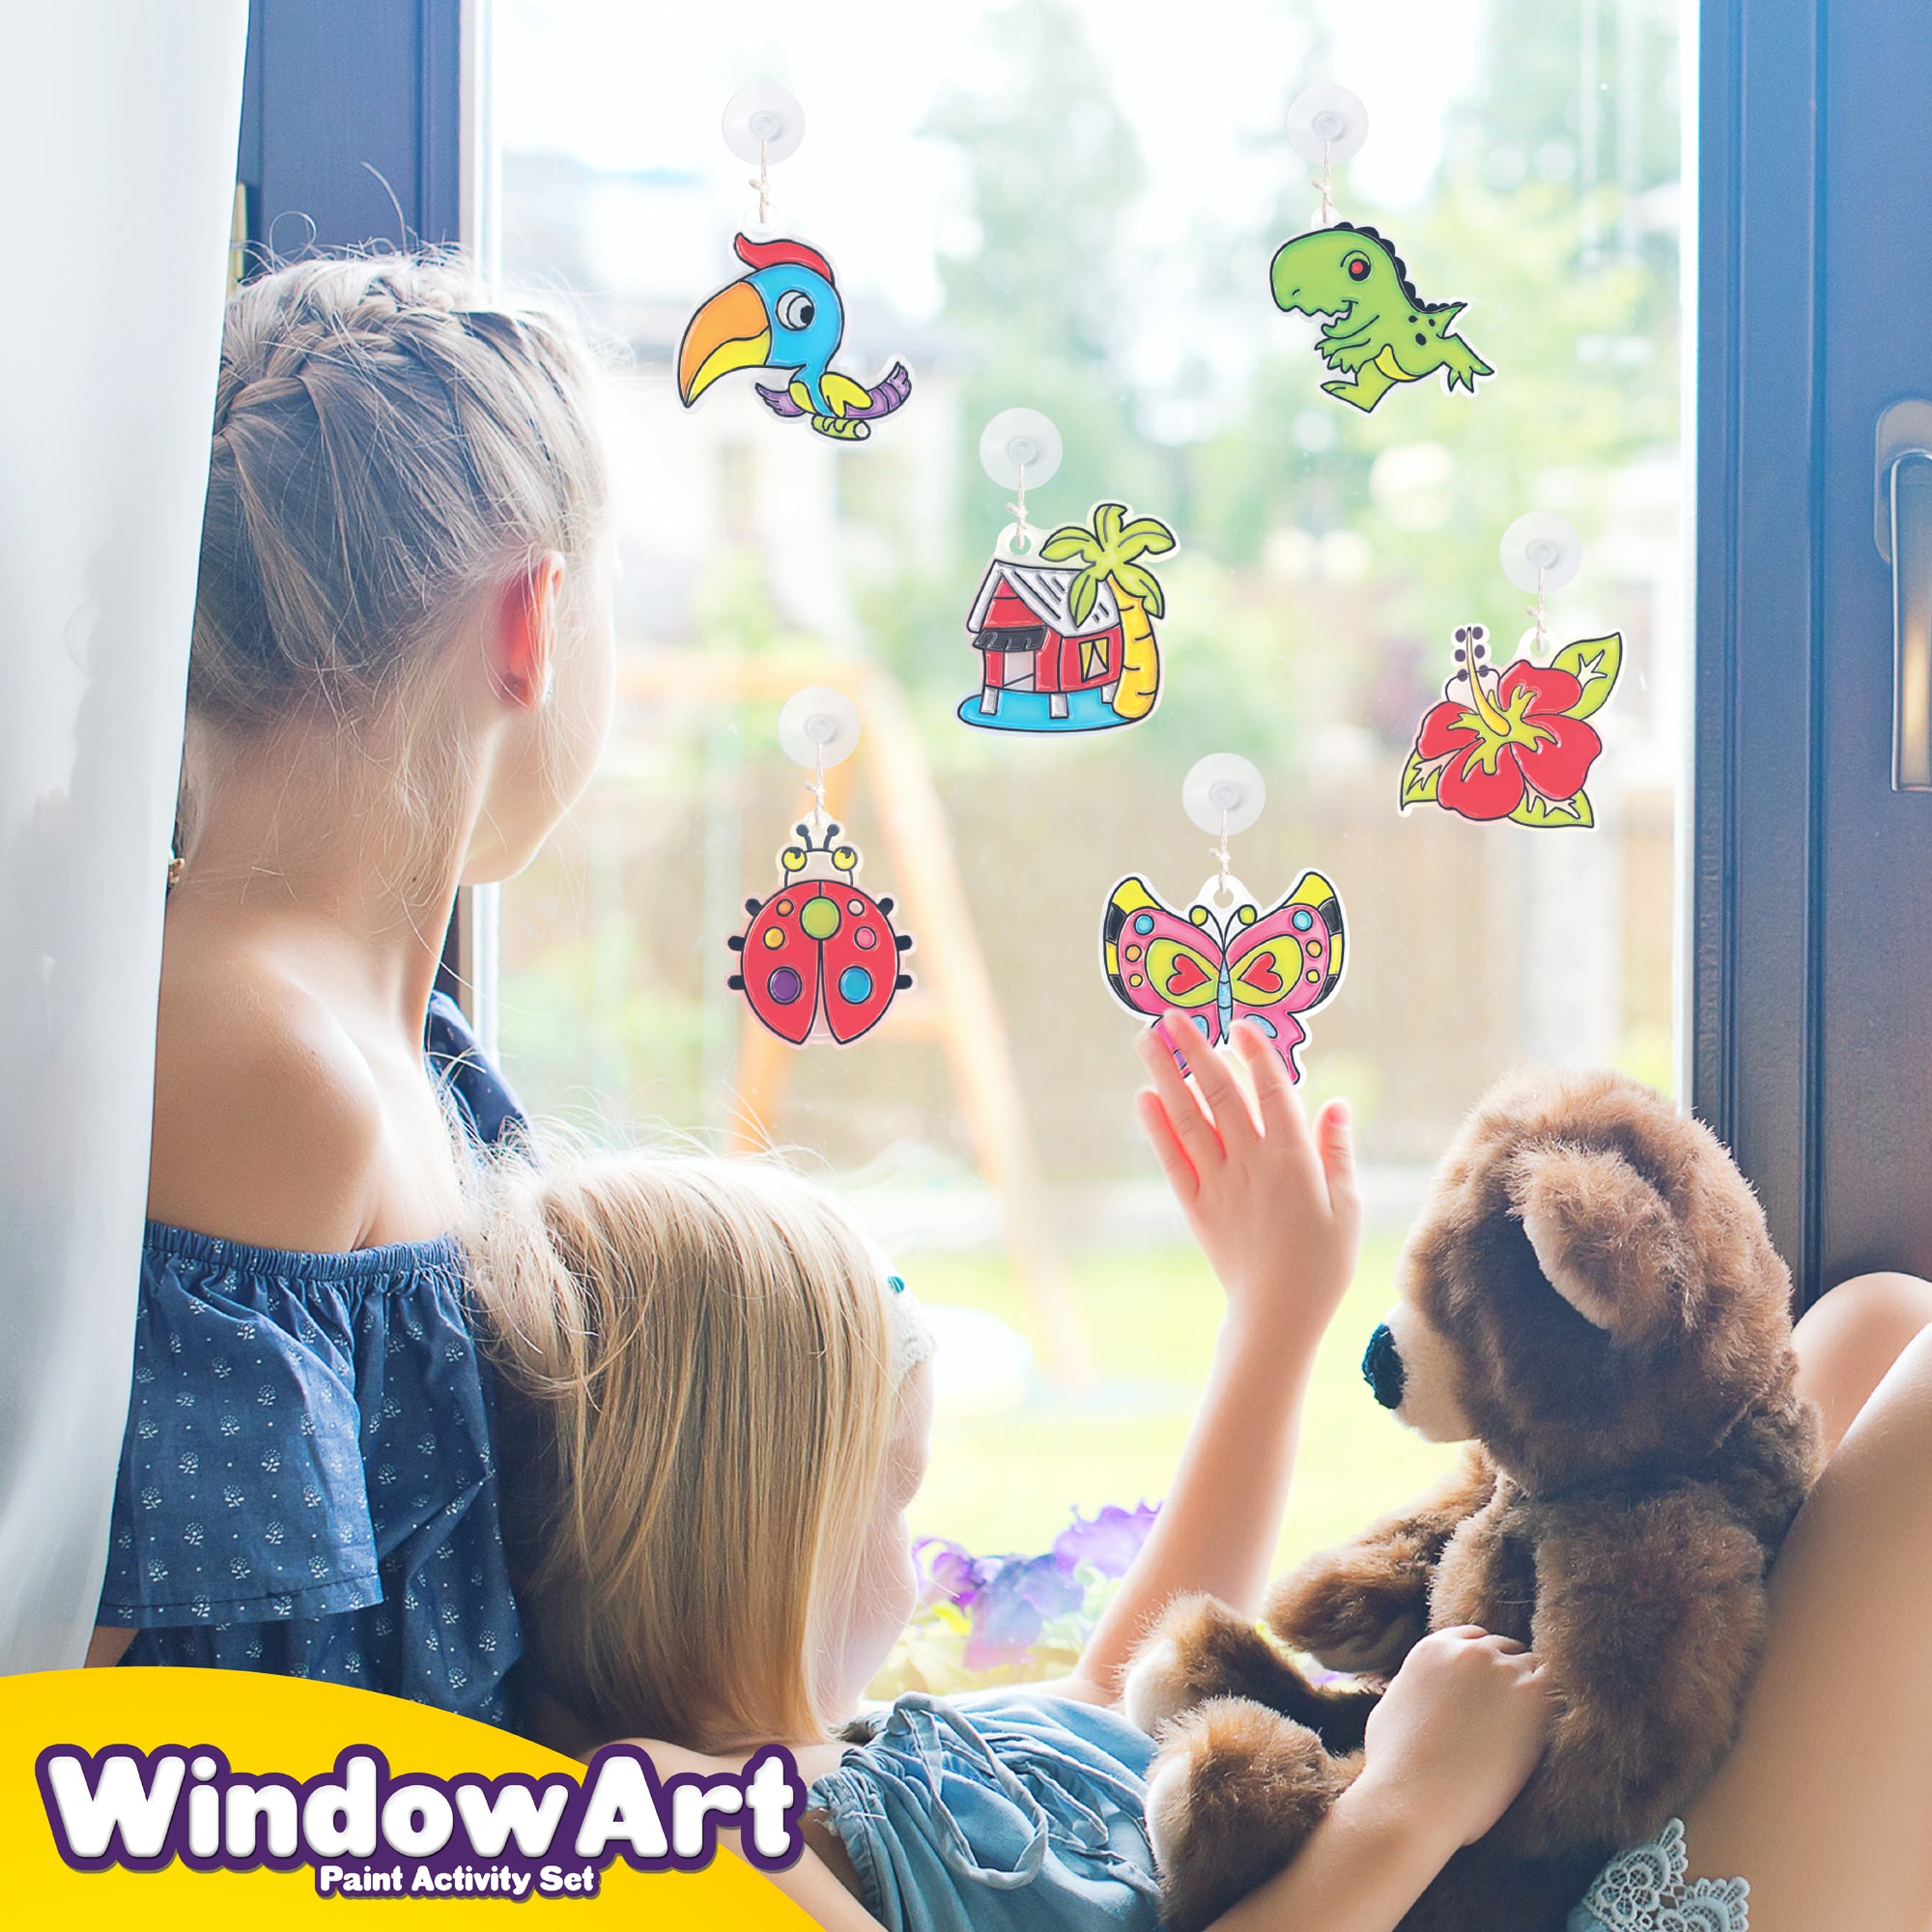 Smarts Crafts Boys & Girls Ages 6+ Insect Window Art Kit - 1 Each